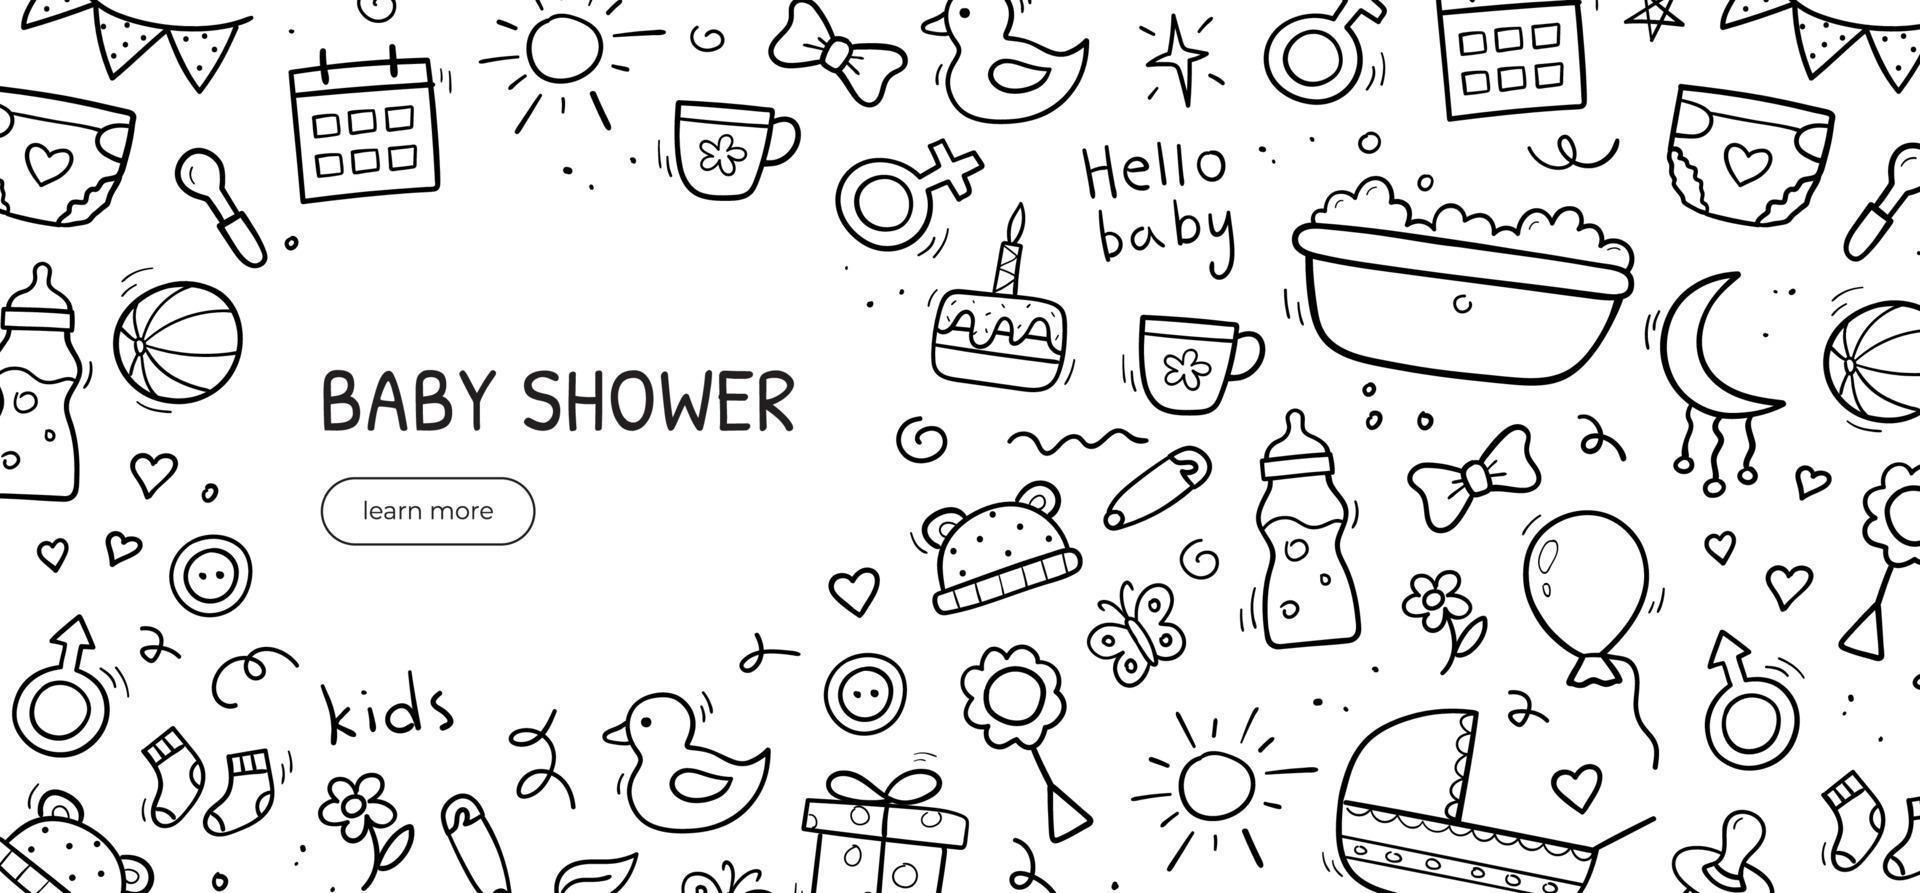 Hand drawn horizontal banner of baby objects and elements. Background template design. Vector illustration.